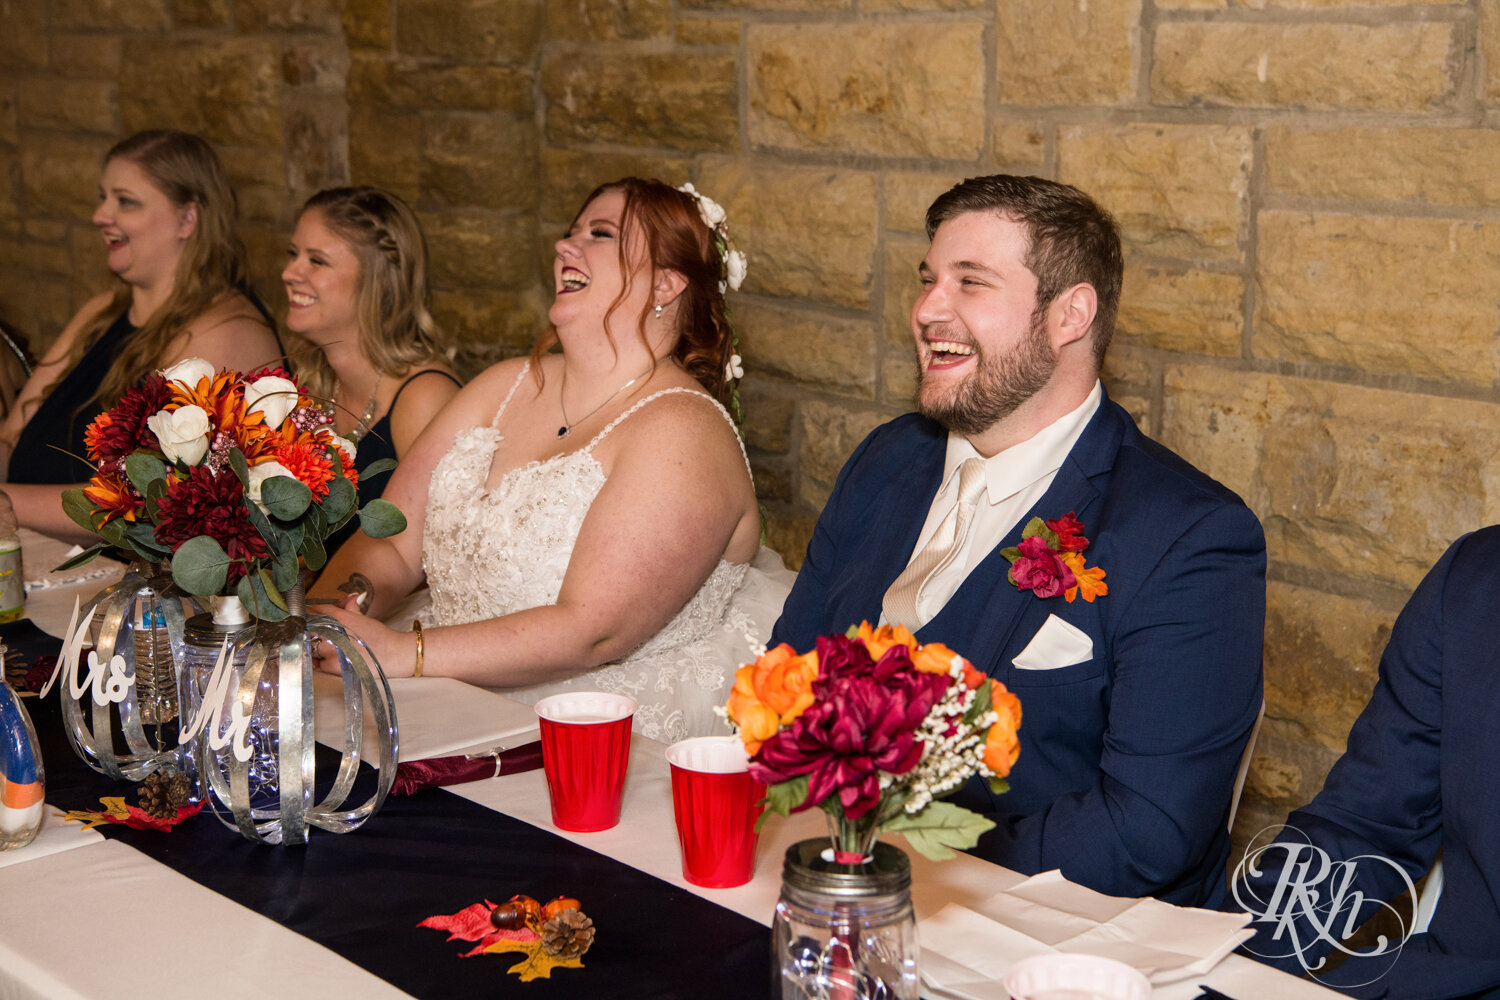 Plus size bride and groom laugh at wedding reception at Olmsted County Fairgrounds in Rochester, Minnesota.